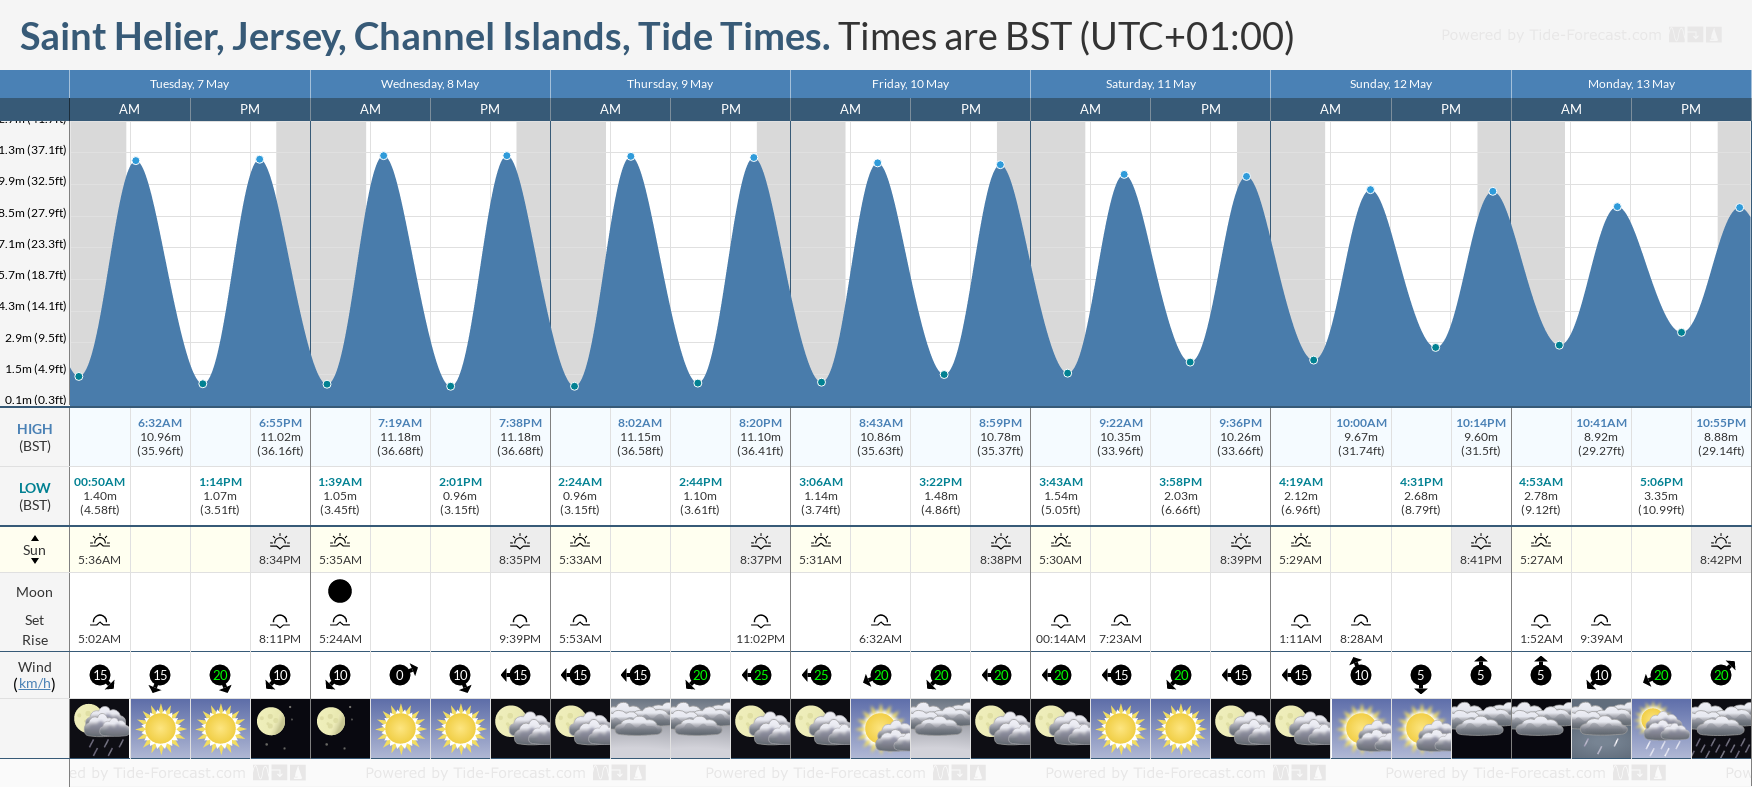 Saint Helier, Jersey, Channel Islands Tide Chart including high and low tide tide times for the next 7 days